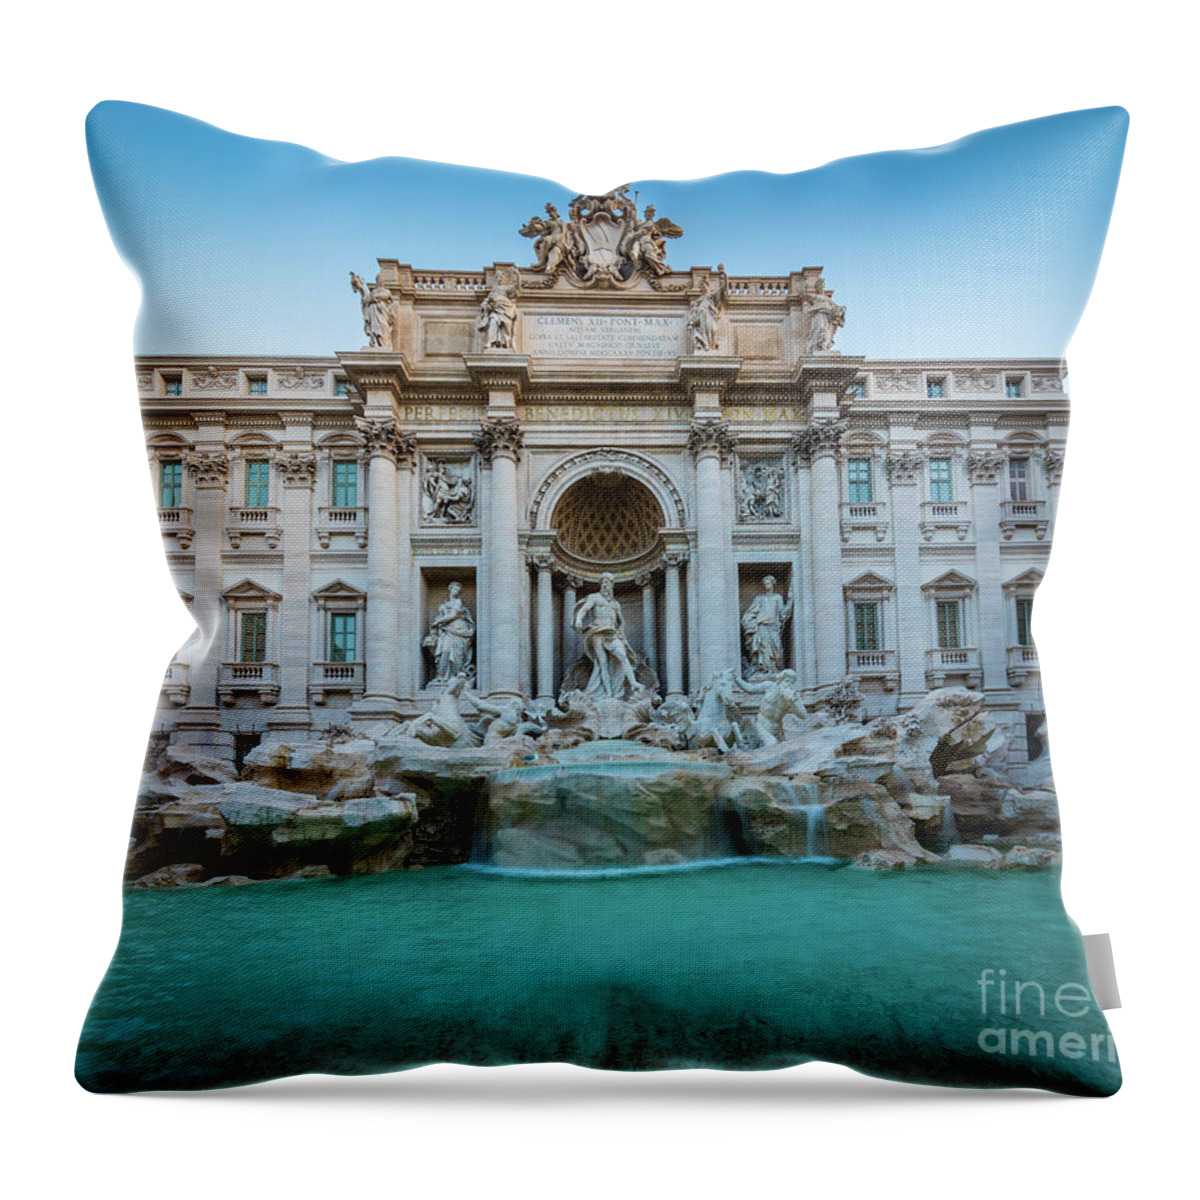 Dolce Vita Throw Pillow featuring the photograph Trevi Fountain by Inge Johnsson